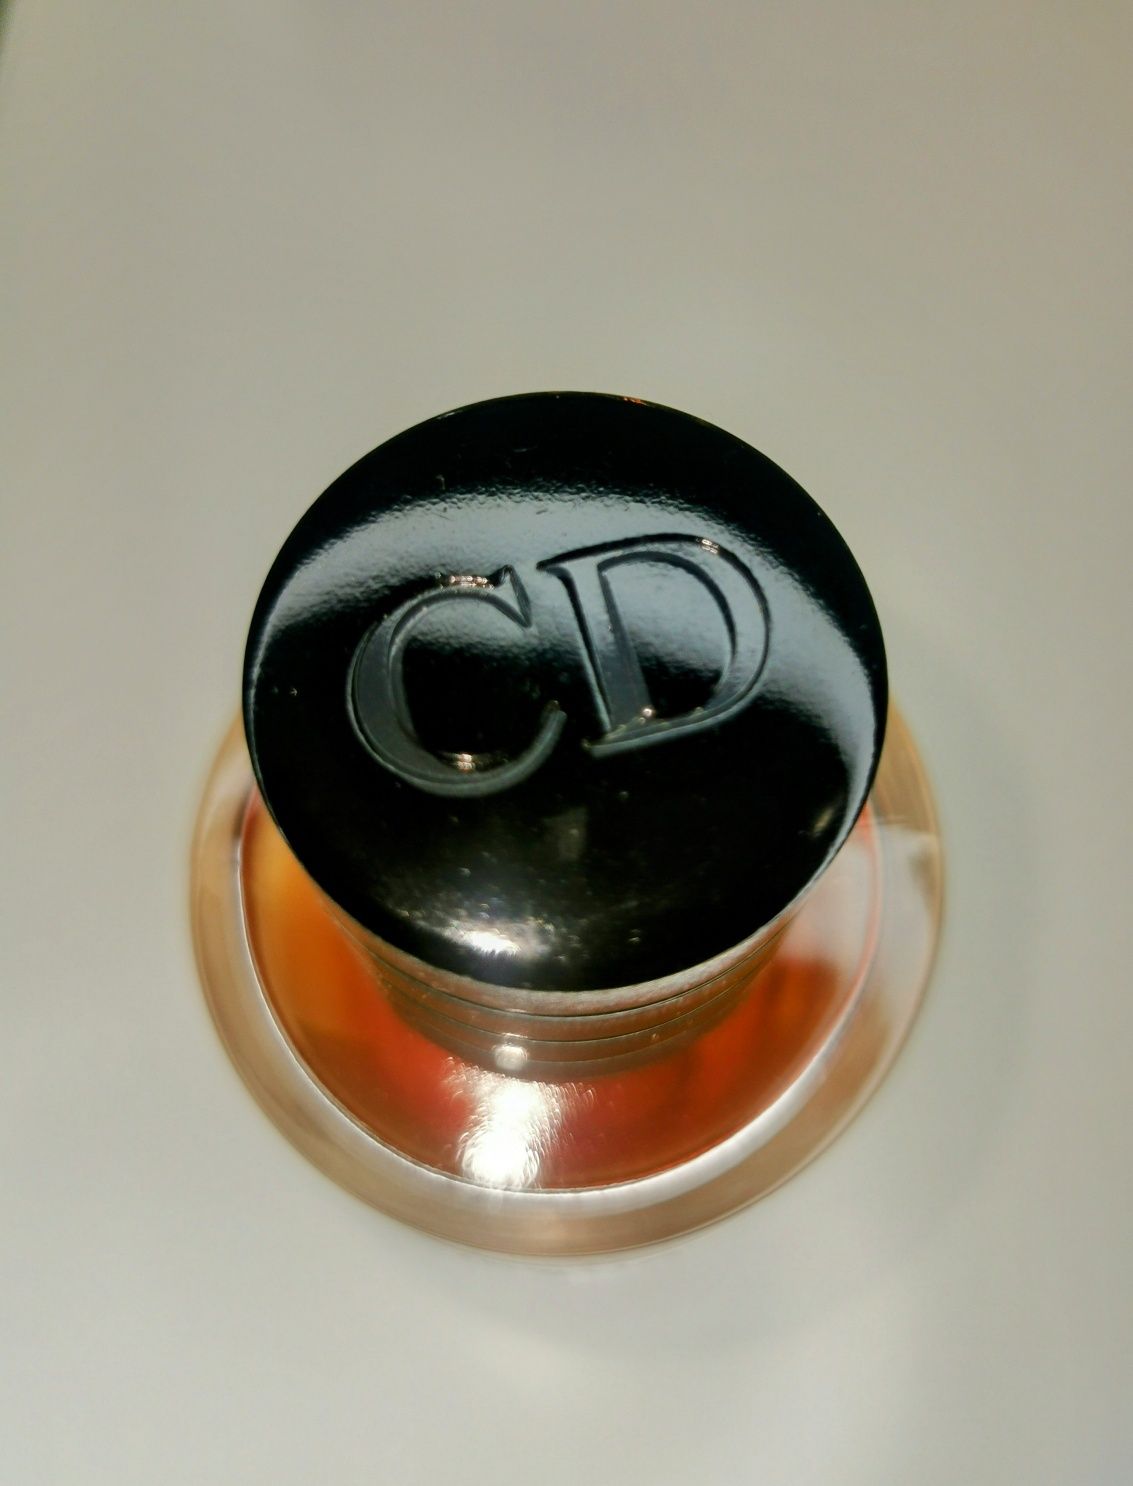 Perfumy Feve Delicieuse Dior